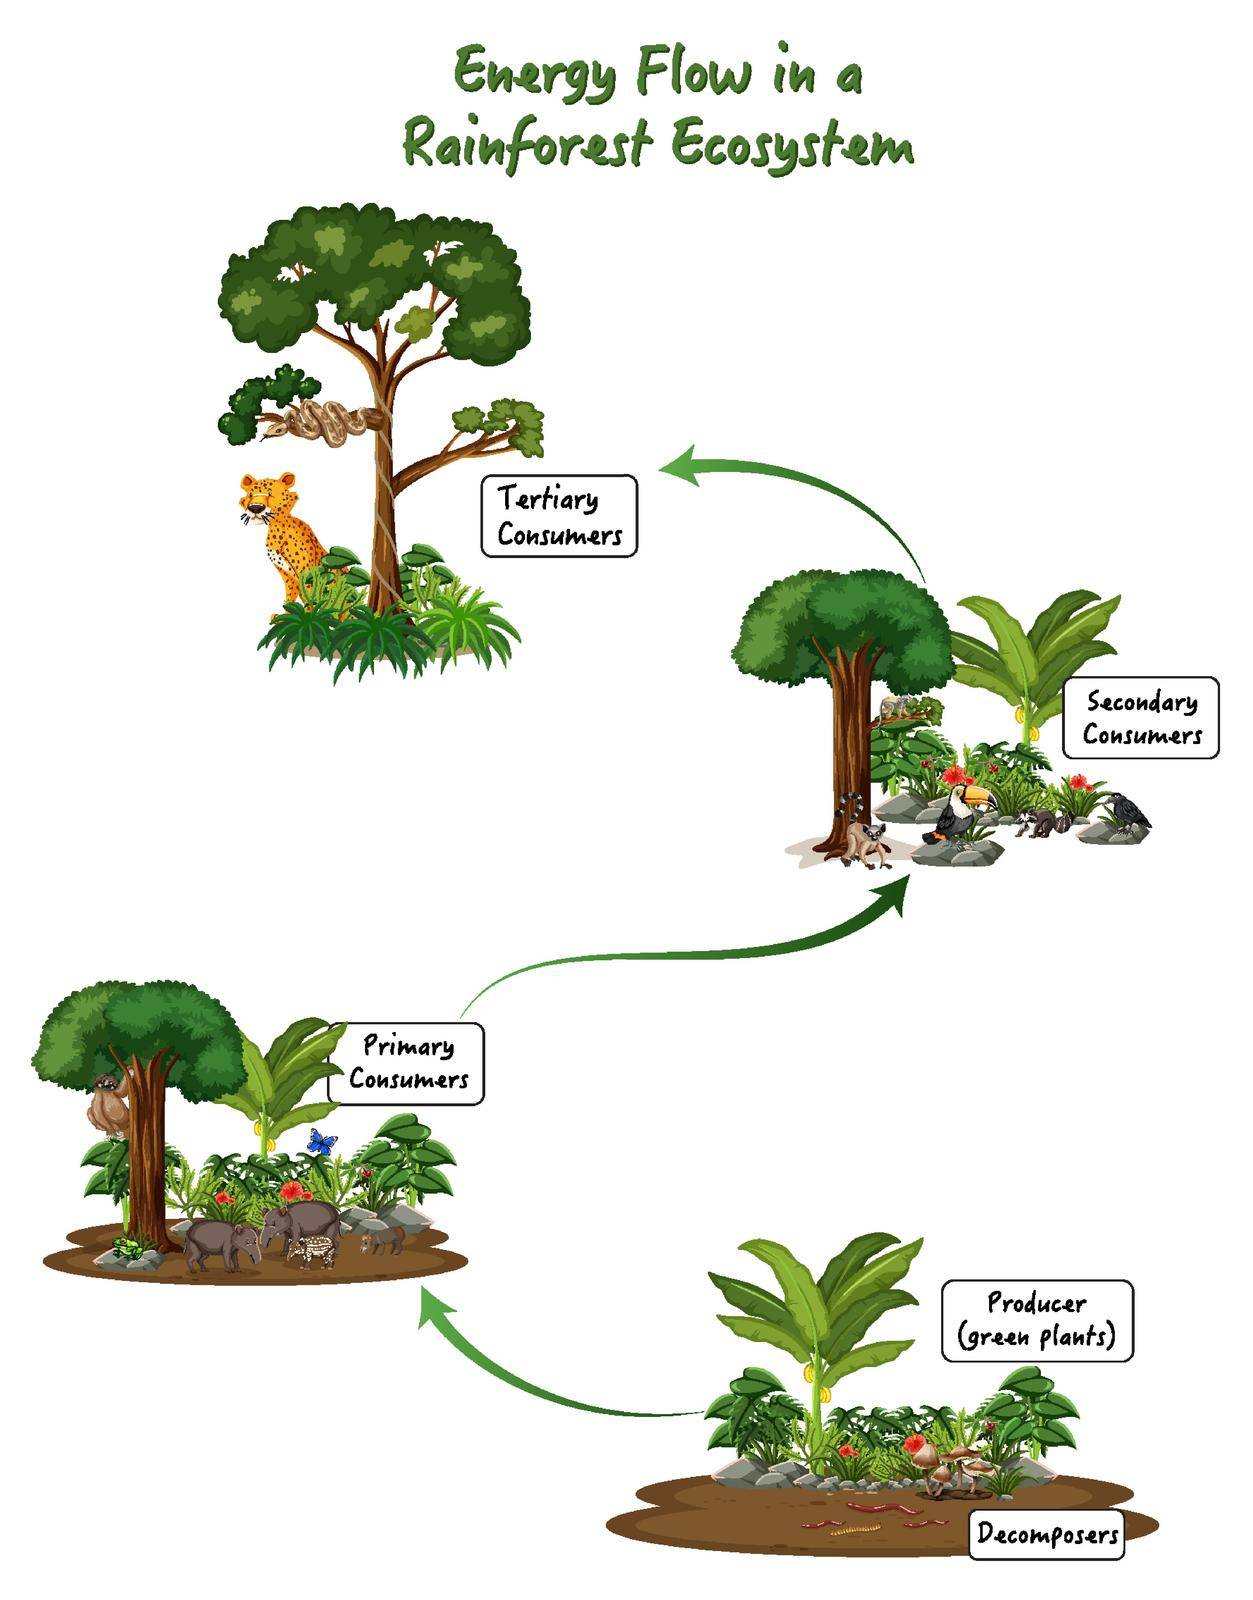 Energy flow in a rainforest ecosystem diagram by iimages